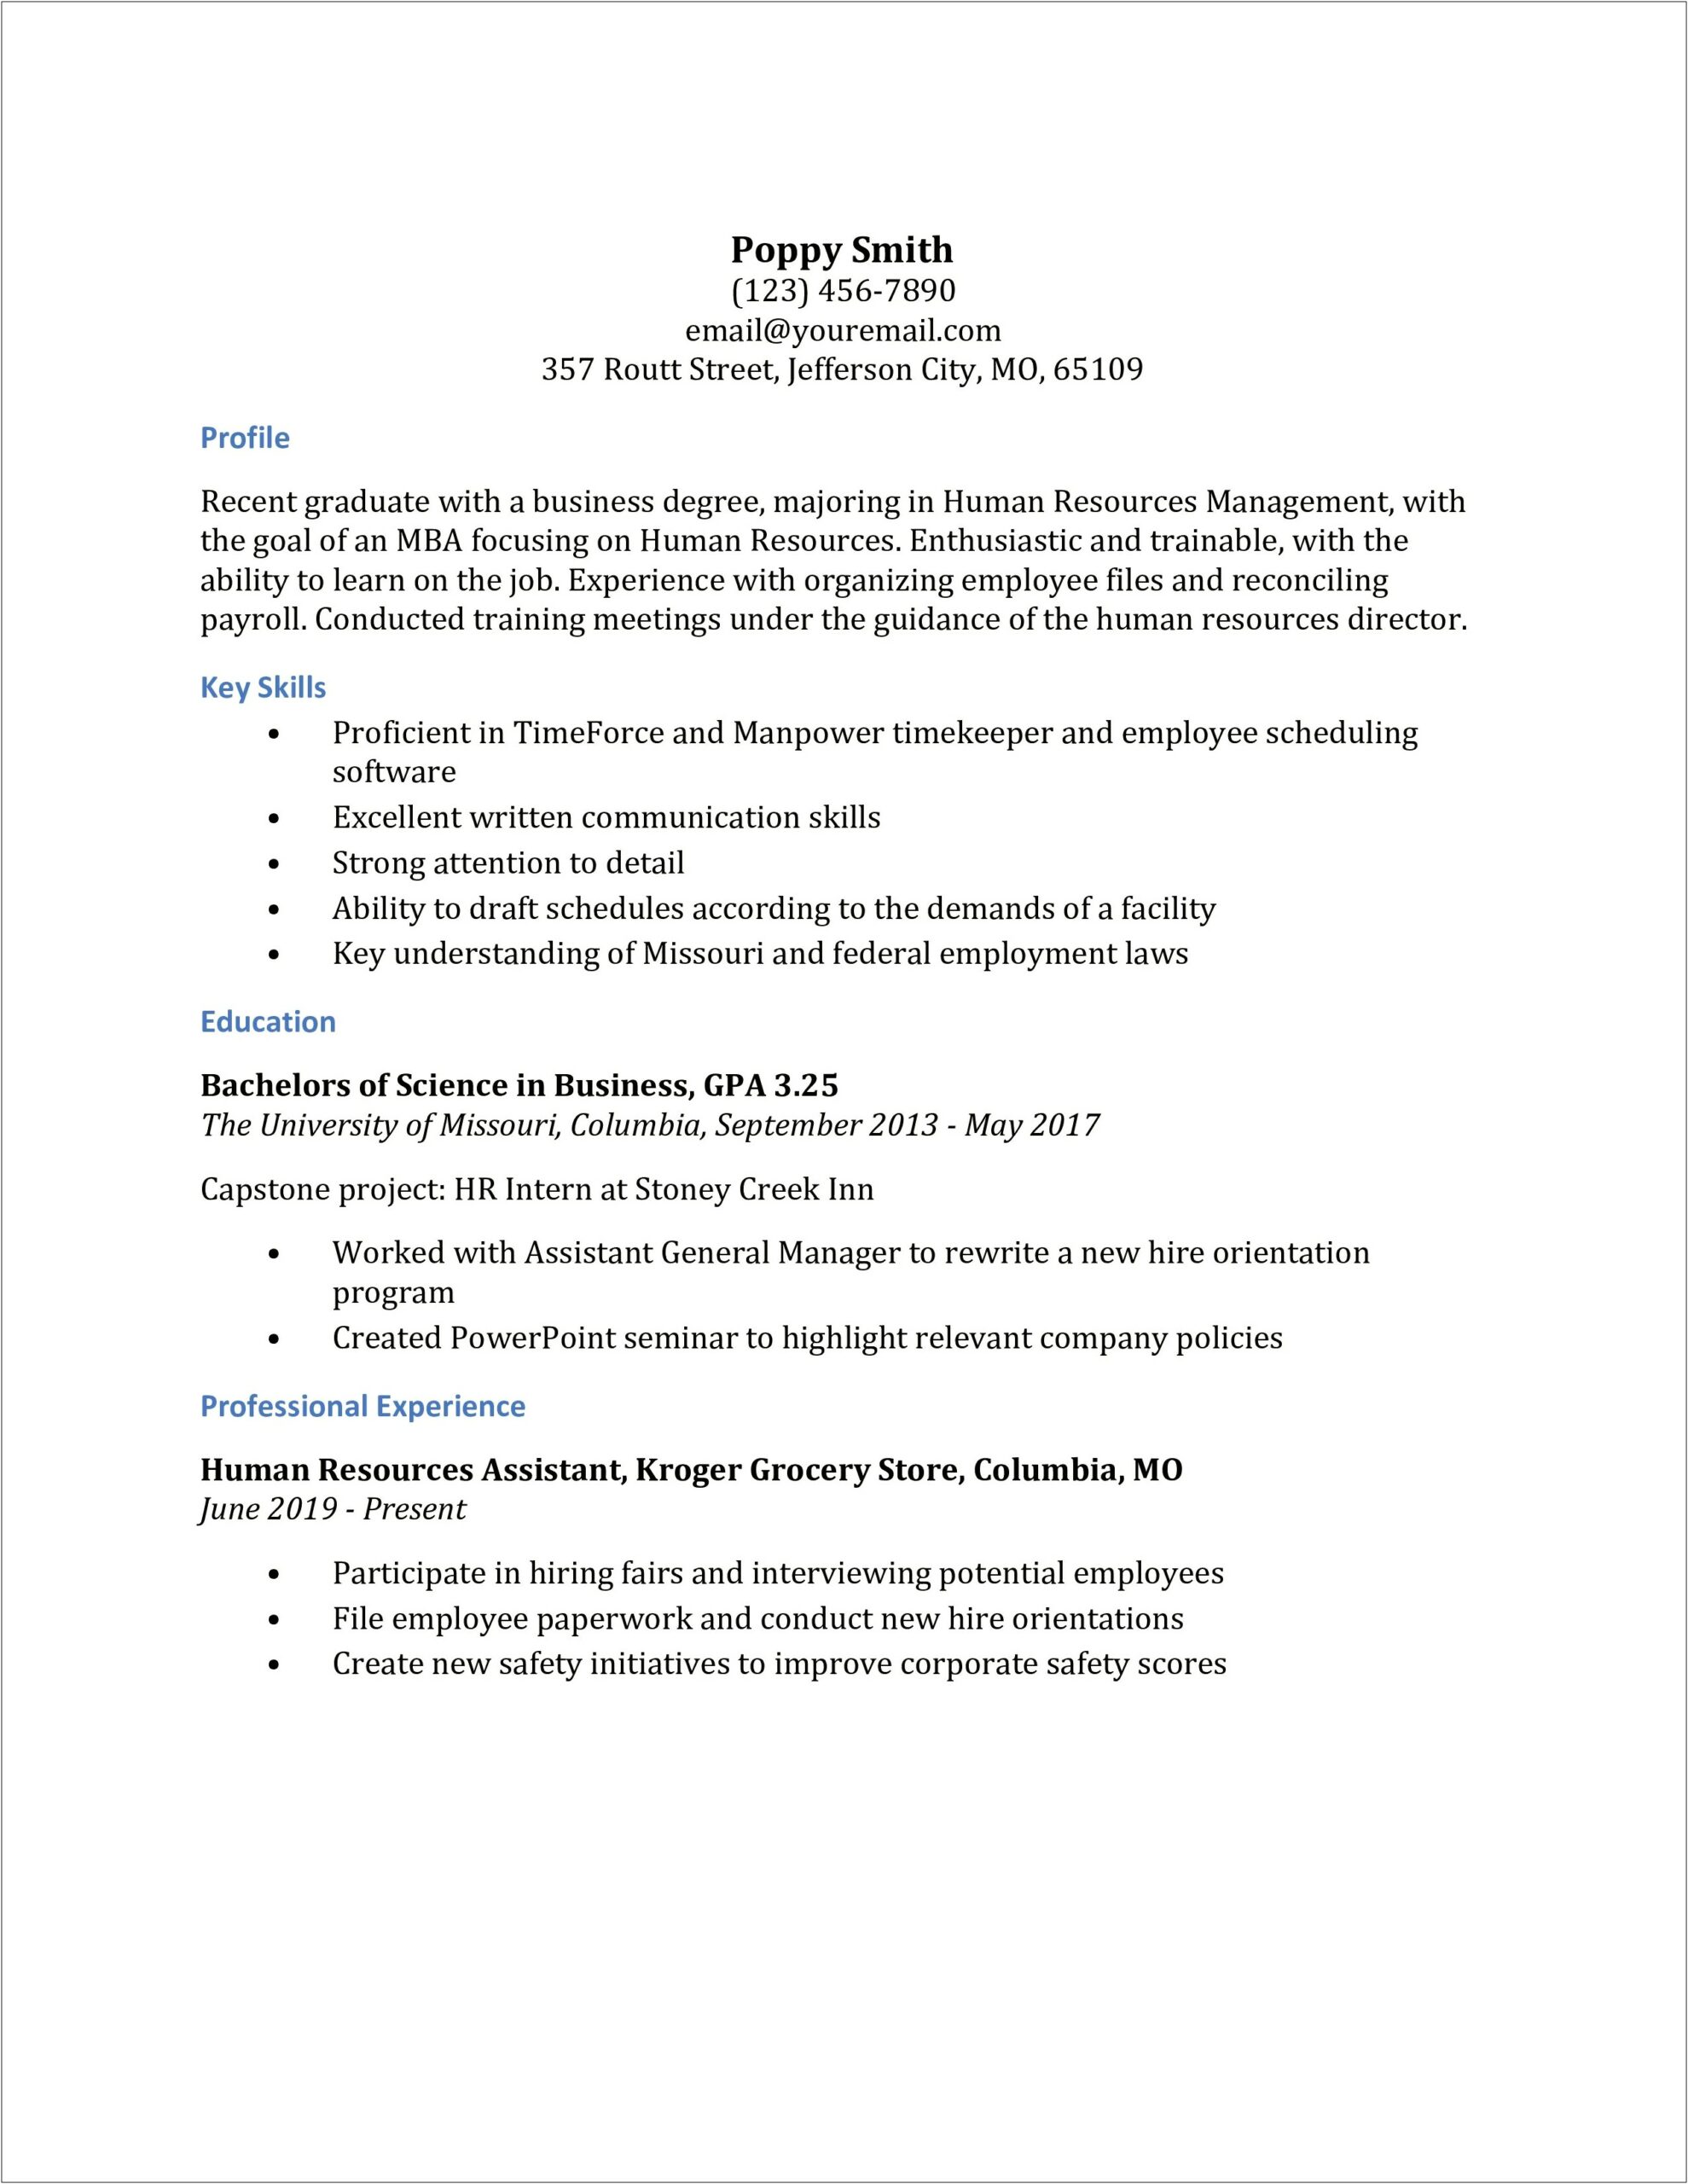 Sample Hr Resume With Union Experience